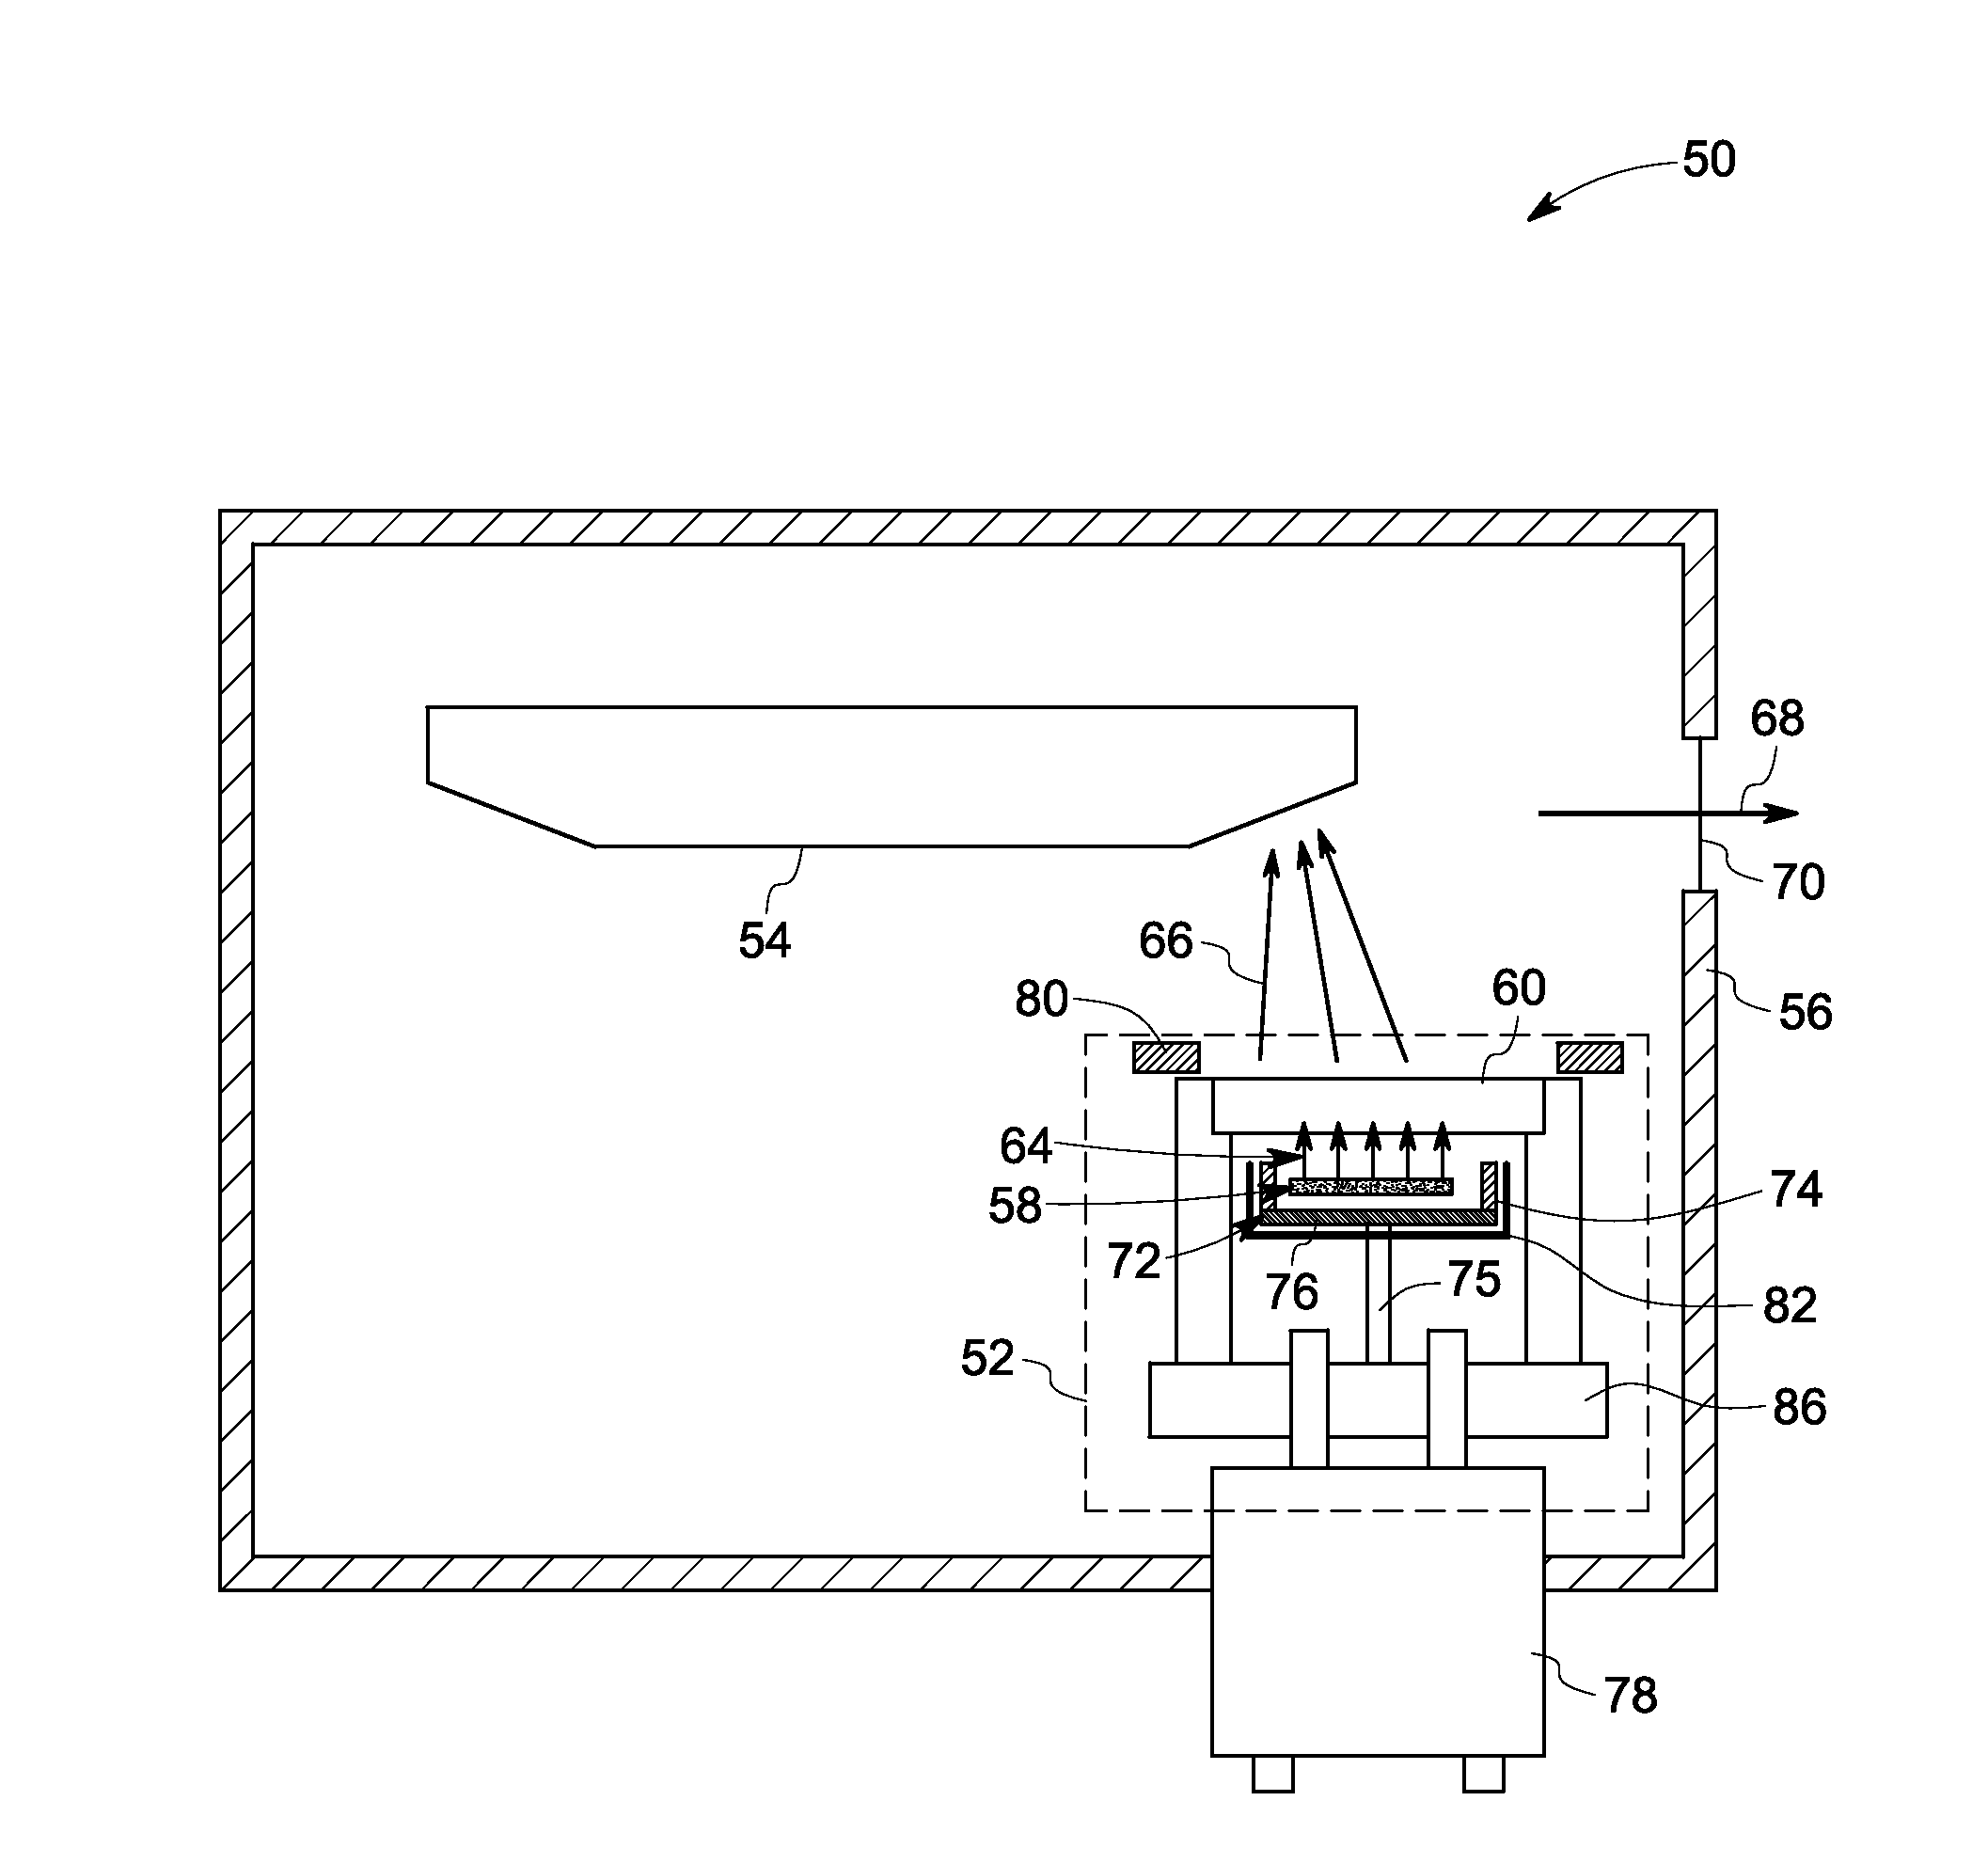 System and method for beam focusing and control in an indirectly heated cathode